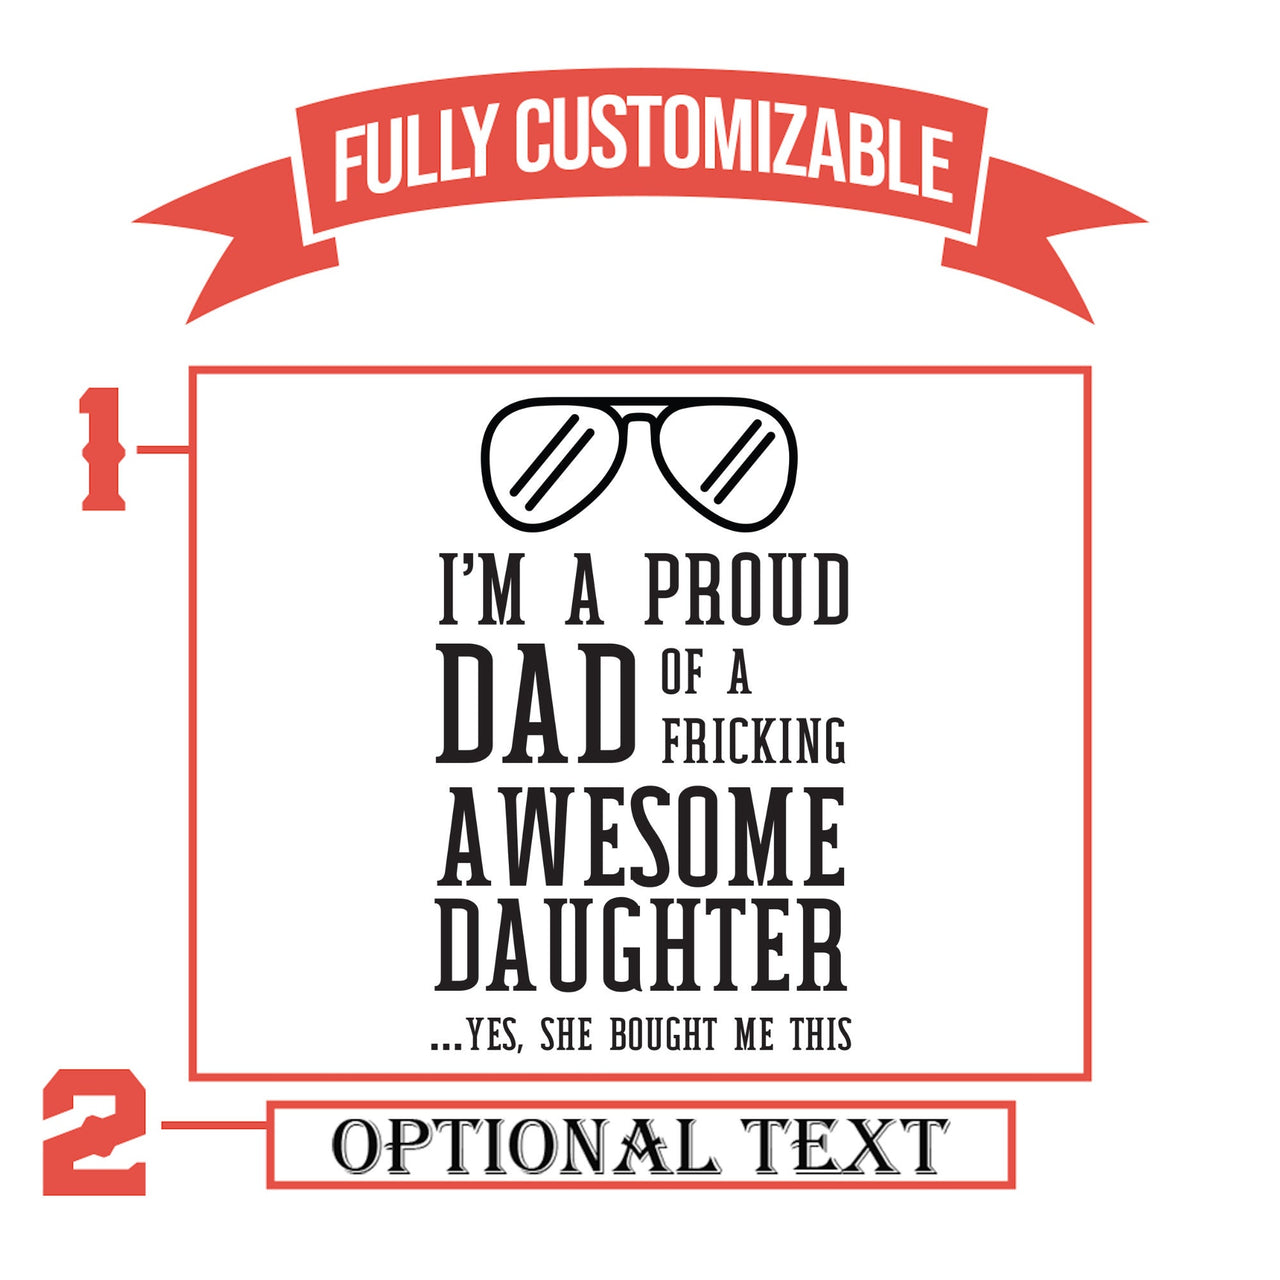 I'm A Proud Dad of A Fricking Awesome Daughter Yes, She Bought Me ThisWhiskey Glasses Gifts For Dad | Rocks Glass | Custom Whiskey Glasses